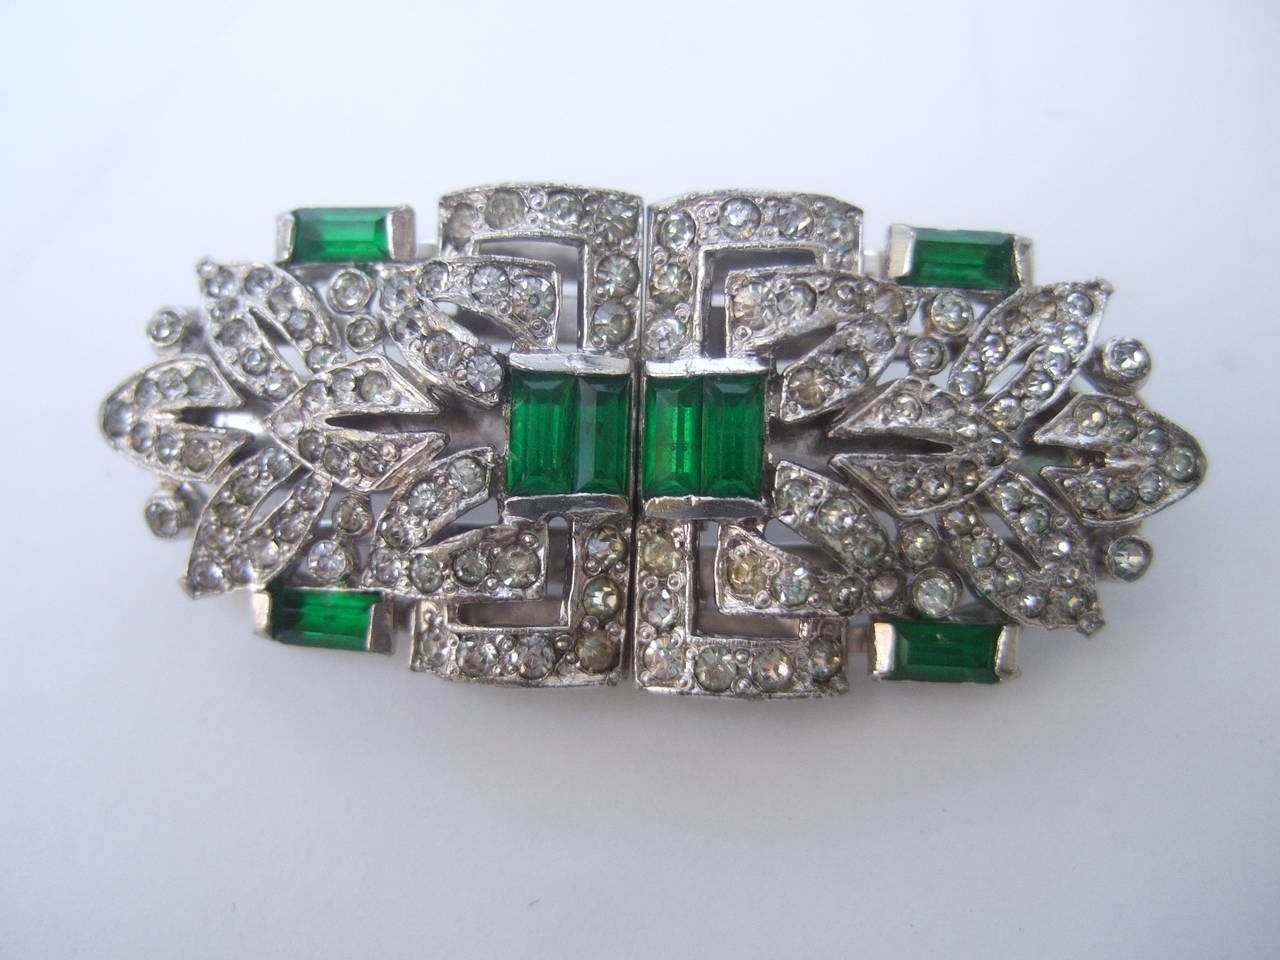 Trifari Art Deco emerald & diamante crystal paste clip-mate brooch c 1940
The elegant retro art deco brooch is designed with glittering
emerald green baguette color crystals surrounded by brilliant
tiny diamante crystals 

The beautiful costume